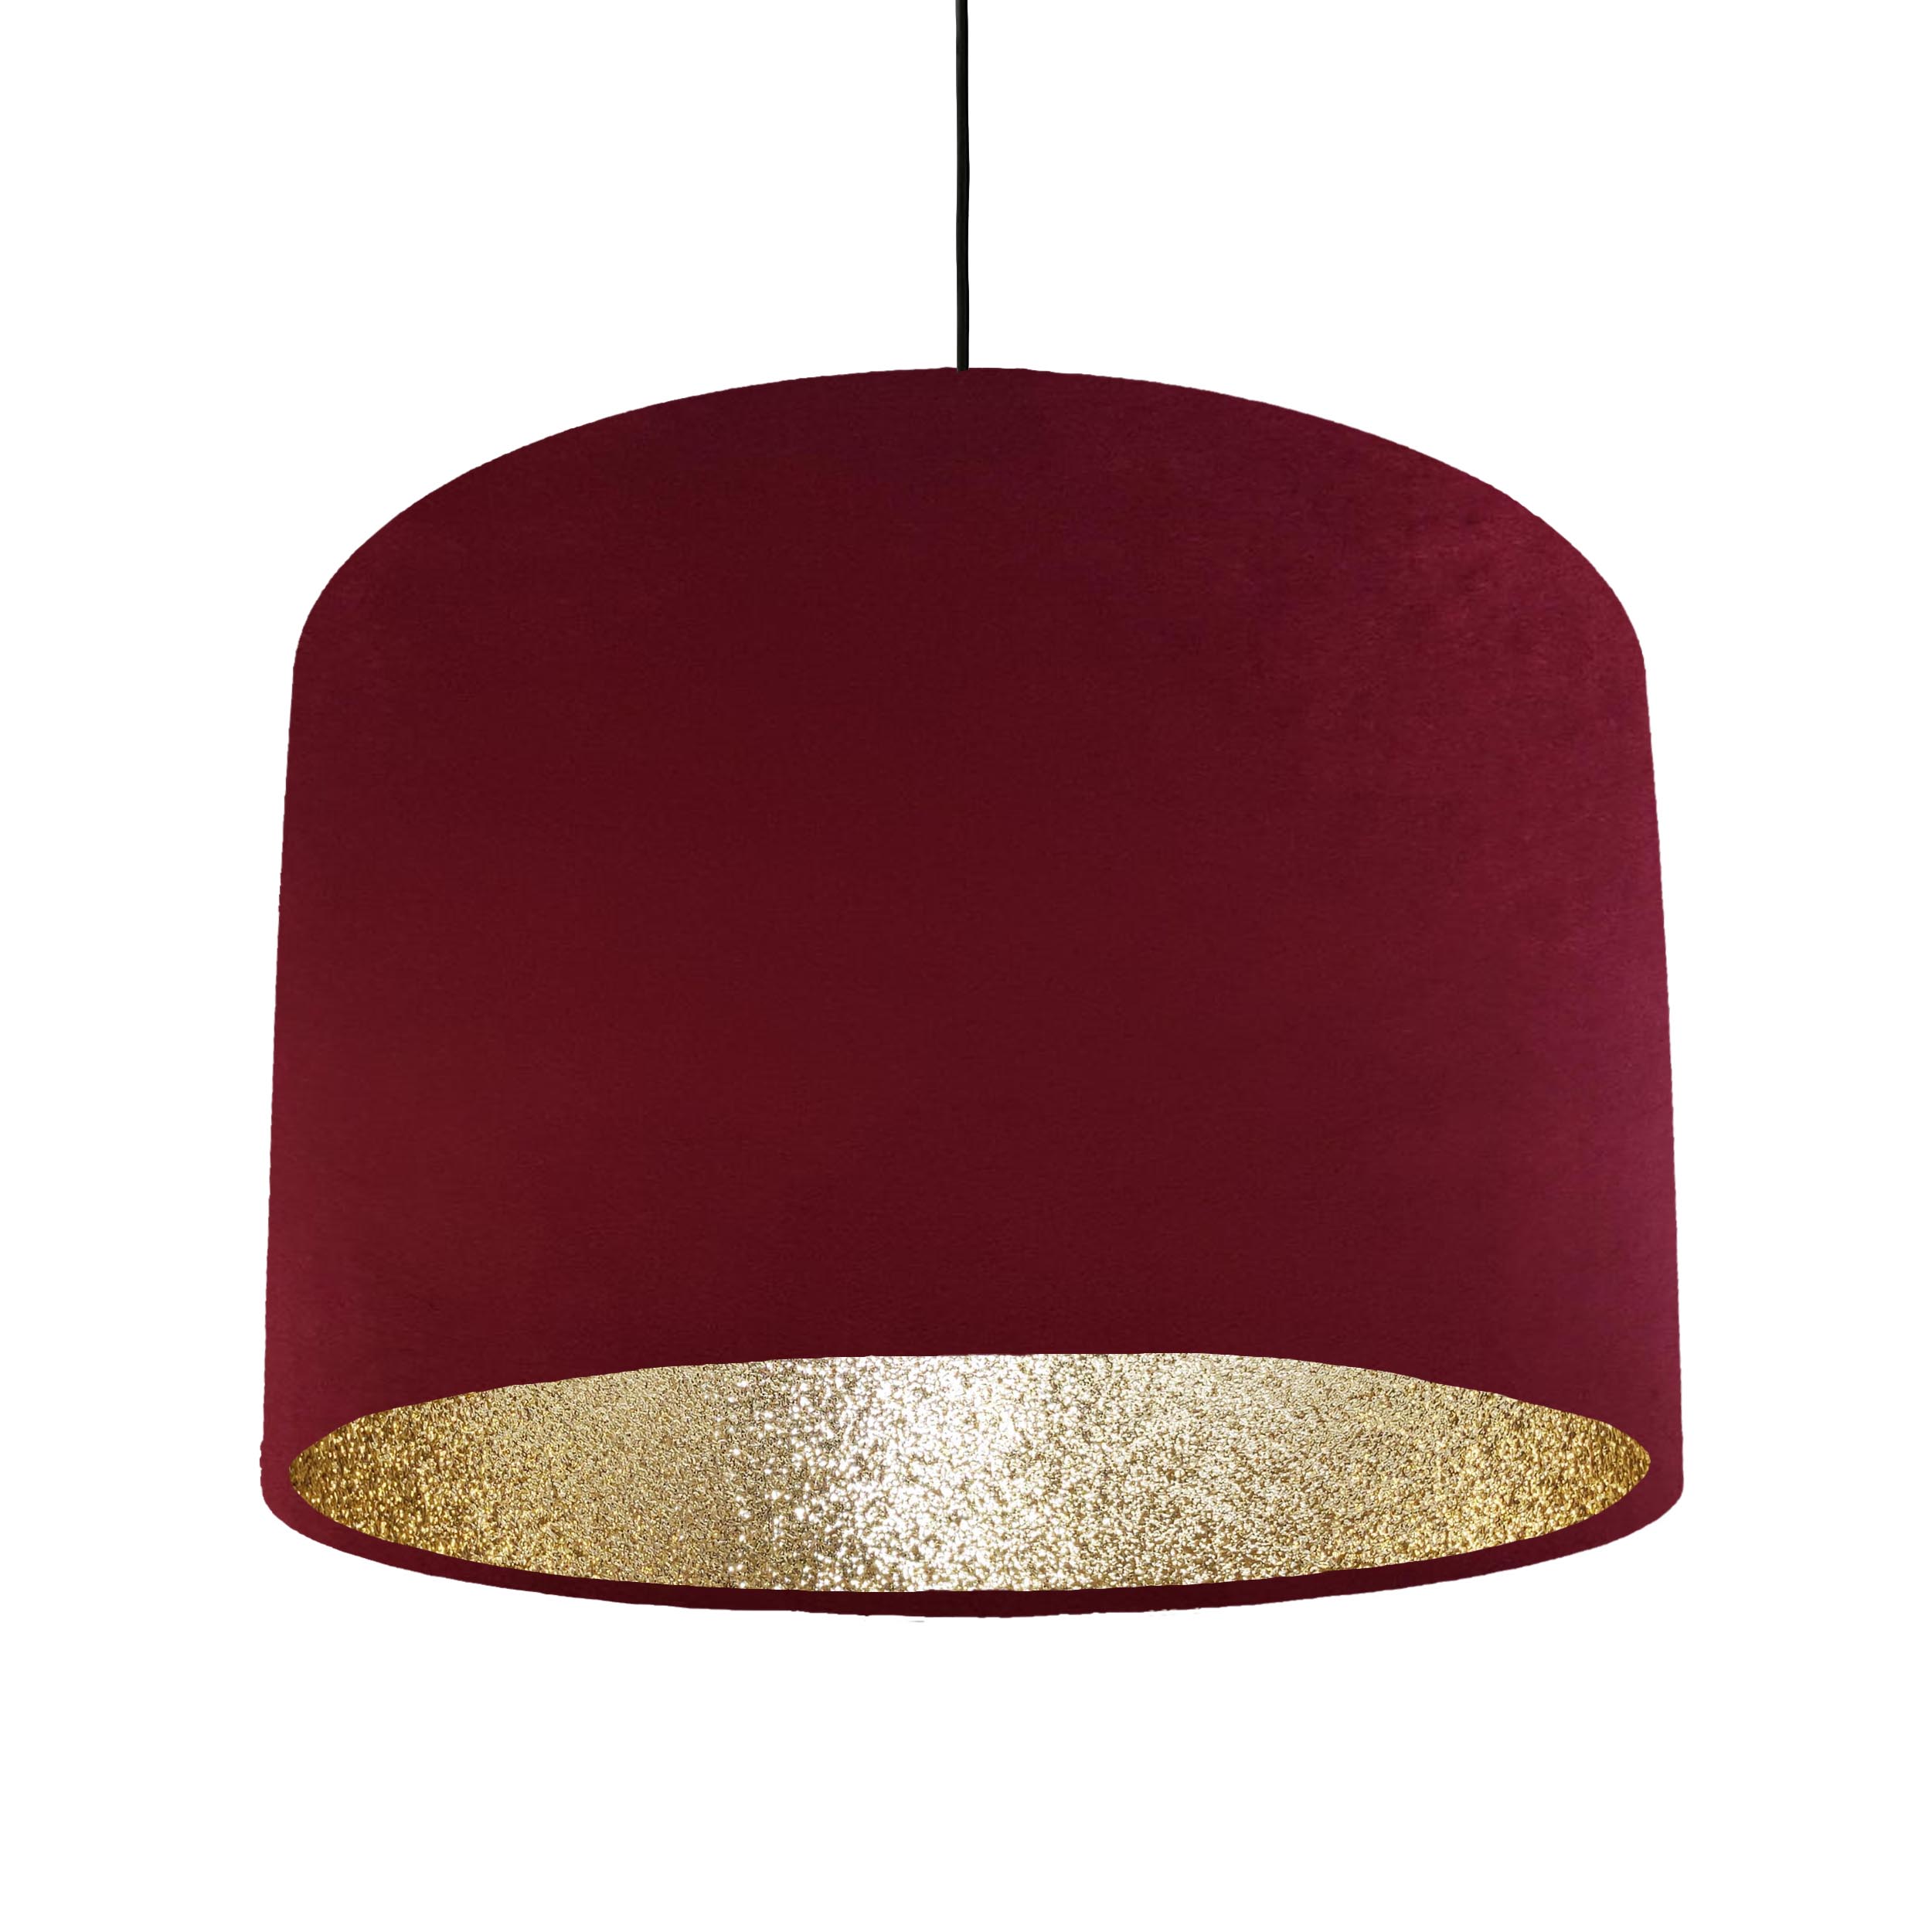 Red Velvet and Gold Glitter Lined Lampshade